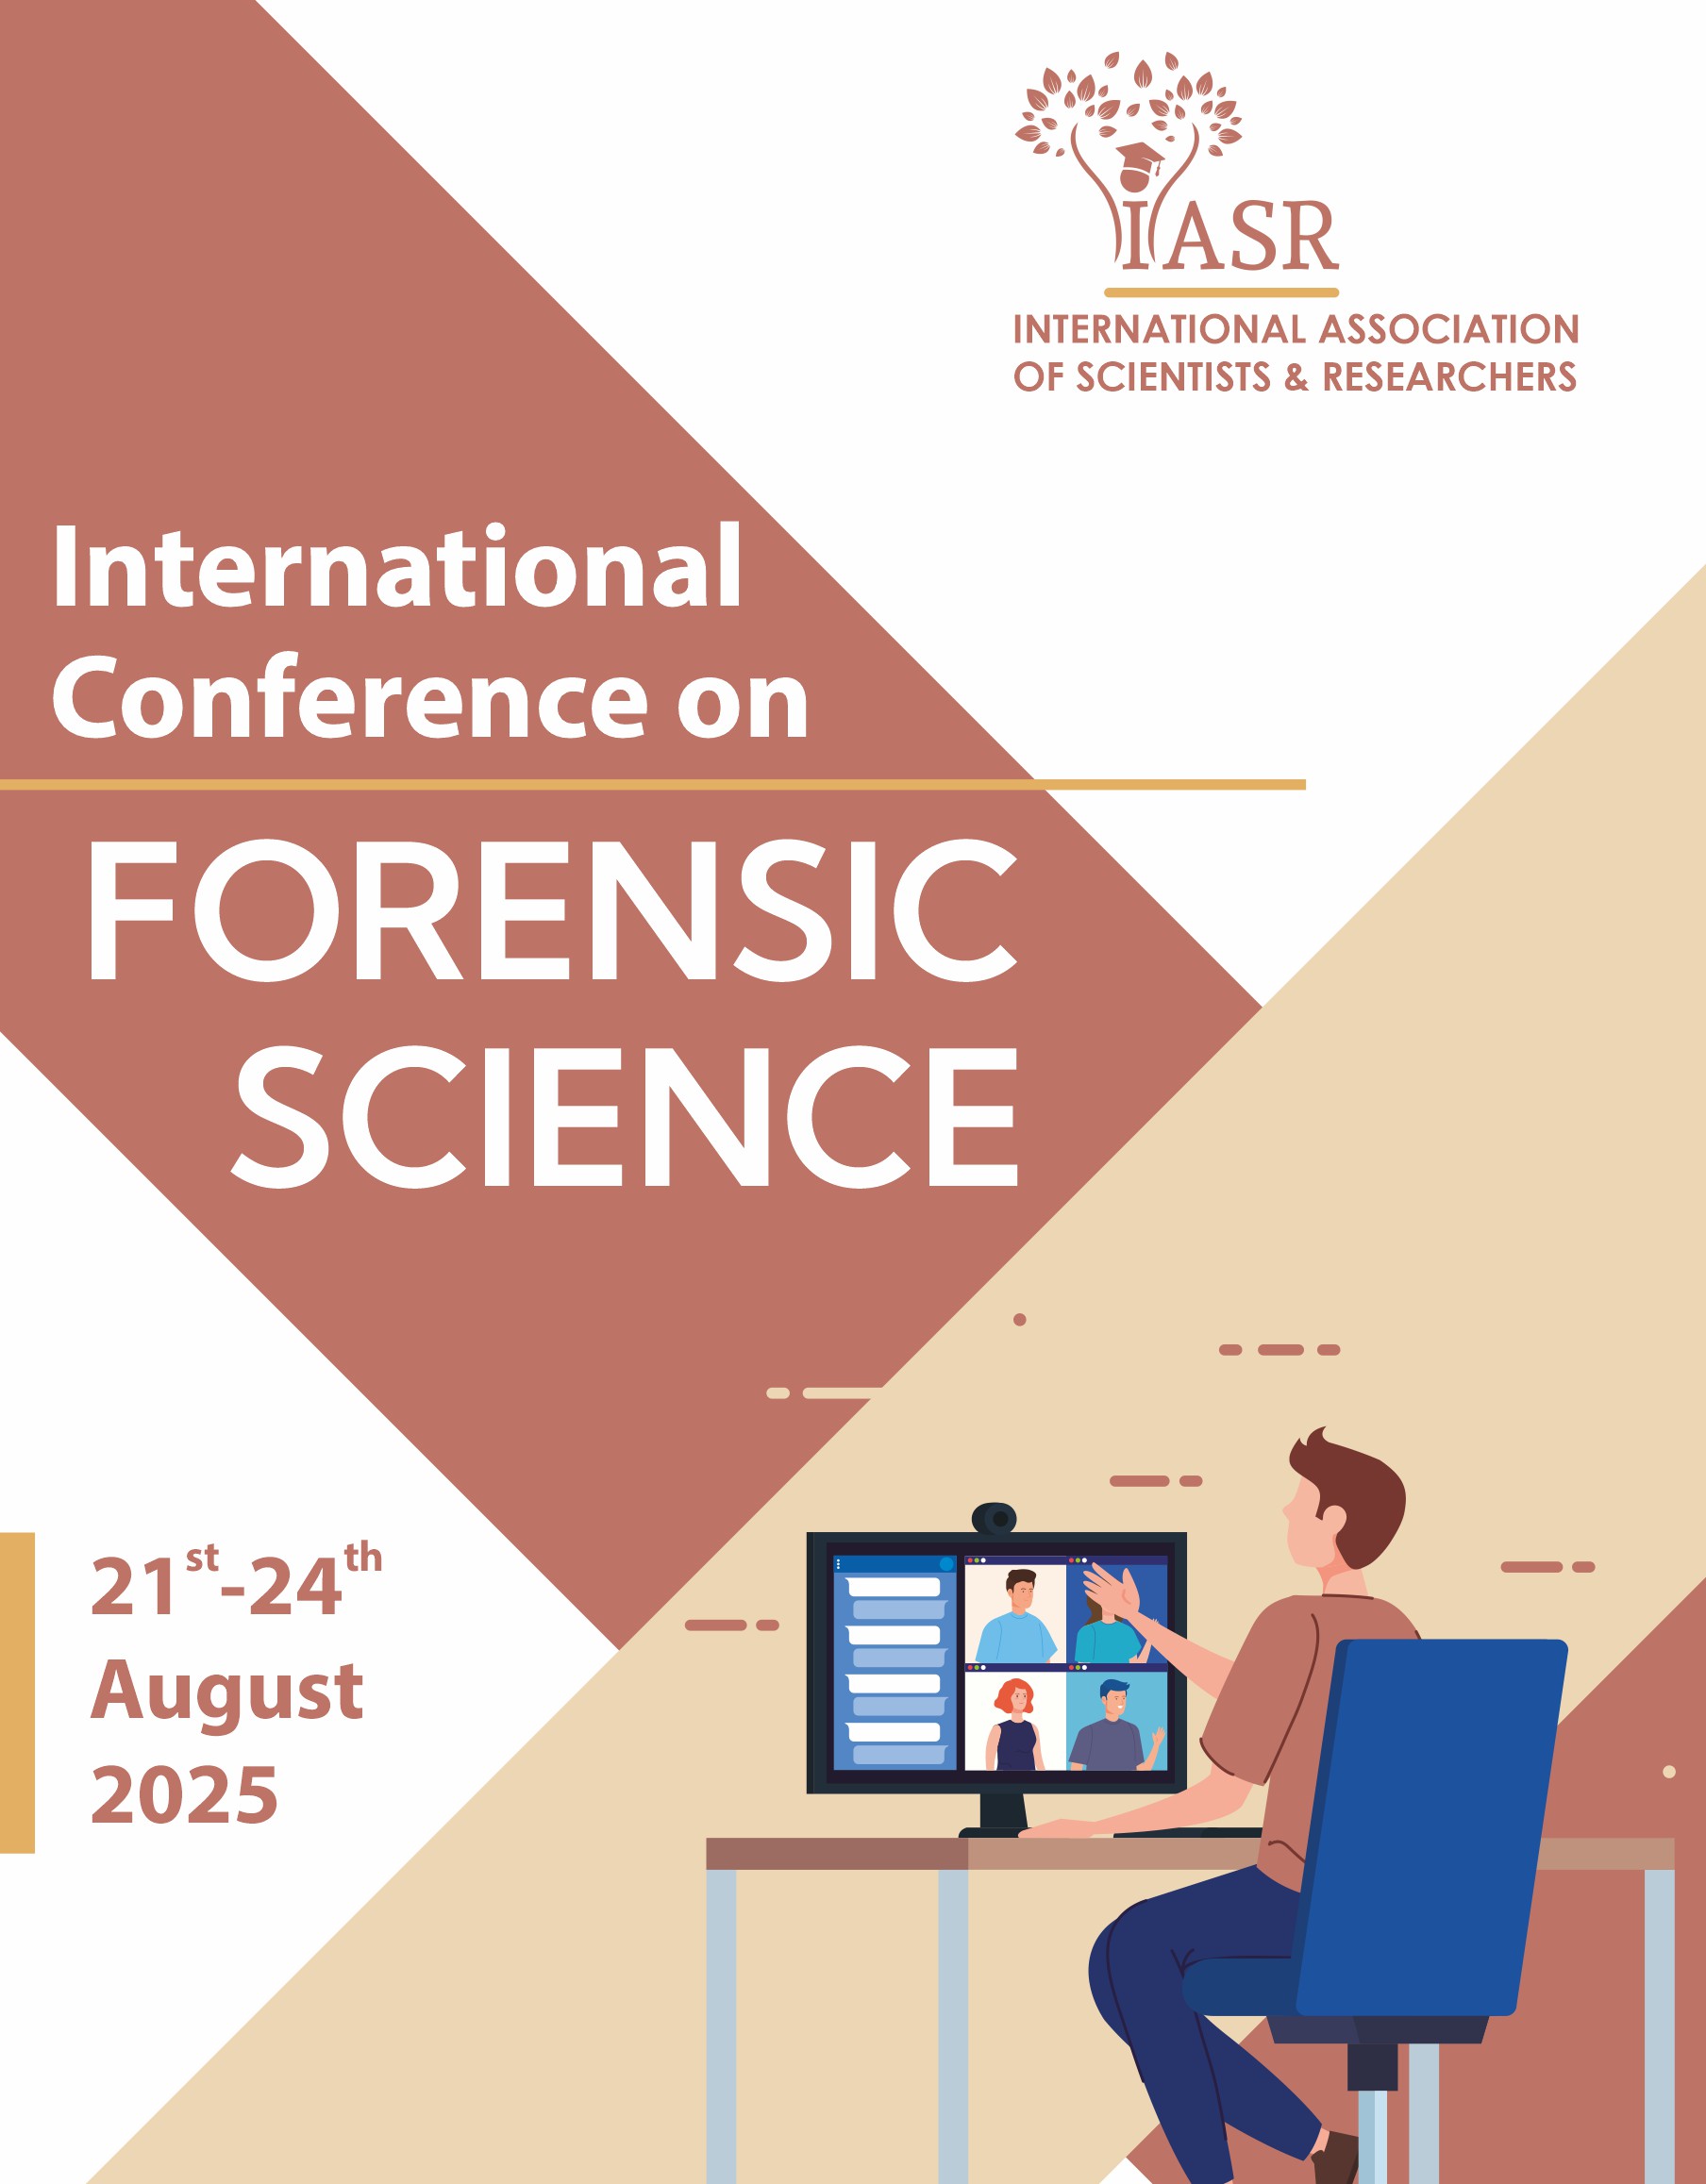 16th IASR International Conference on Forensic Science